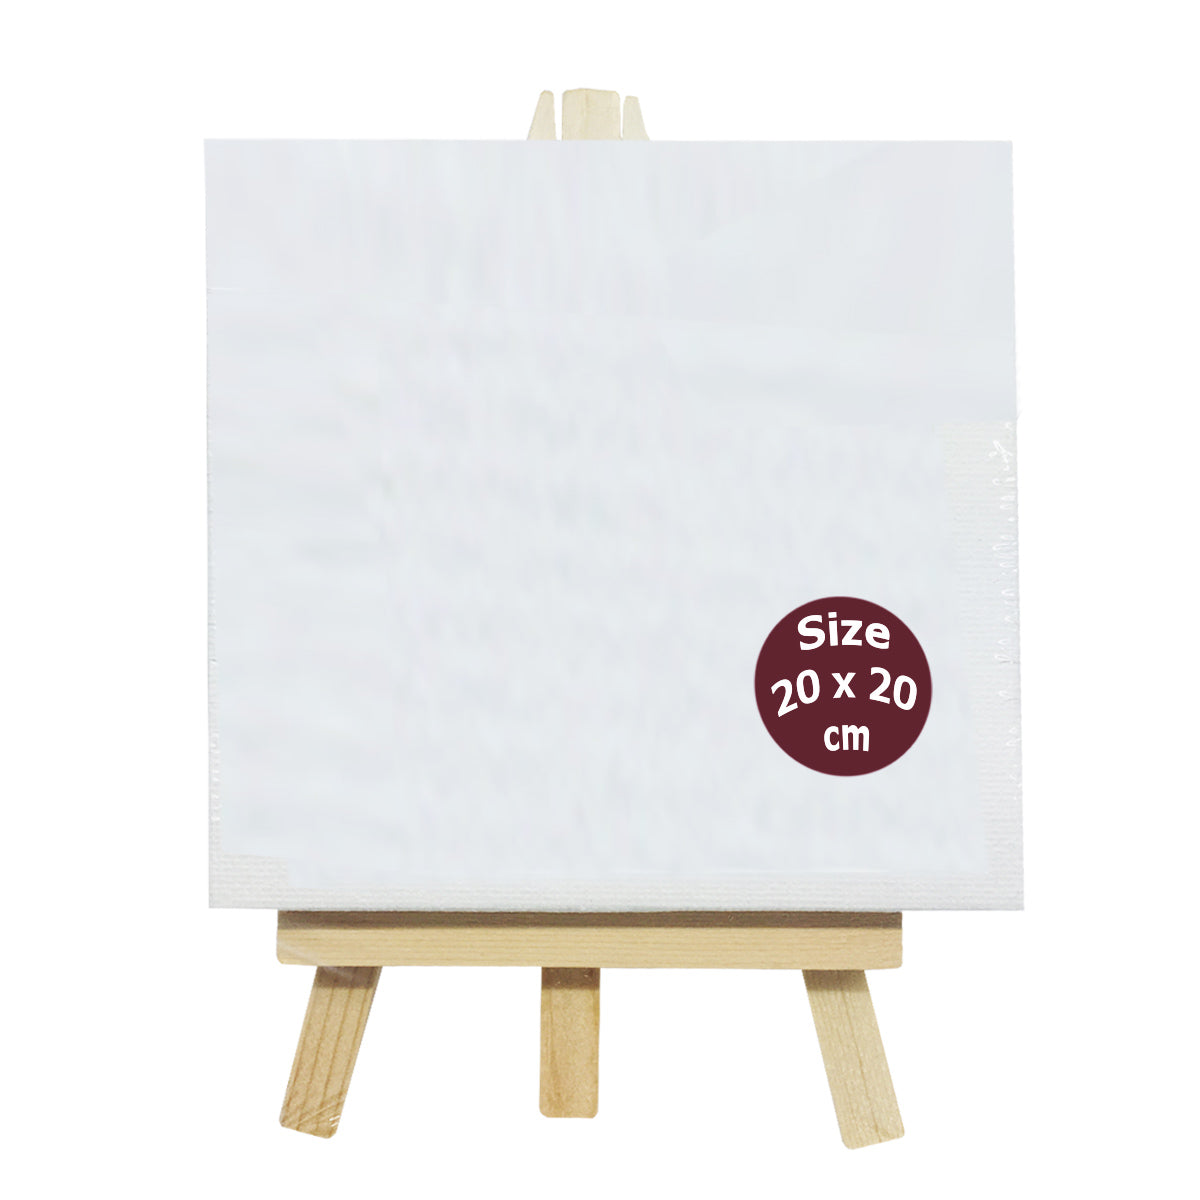 Painting Canvas white boards from najmaonline for best price in Abu Dhabi, Dubai - UAE